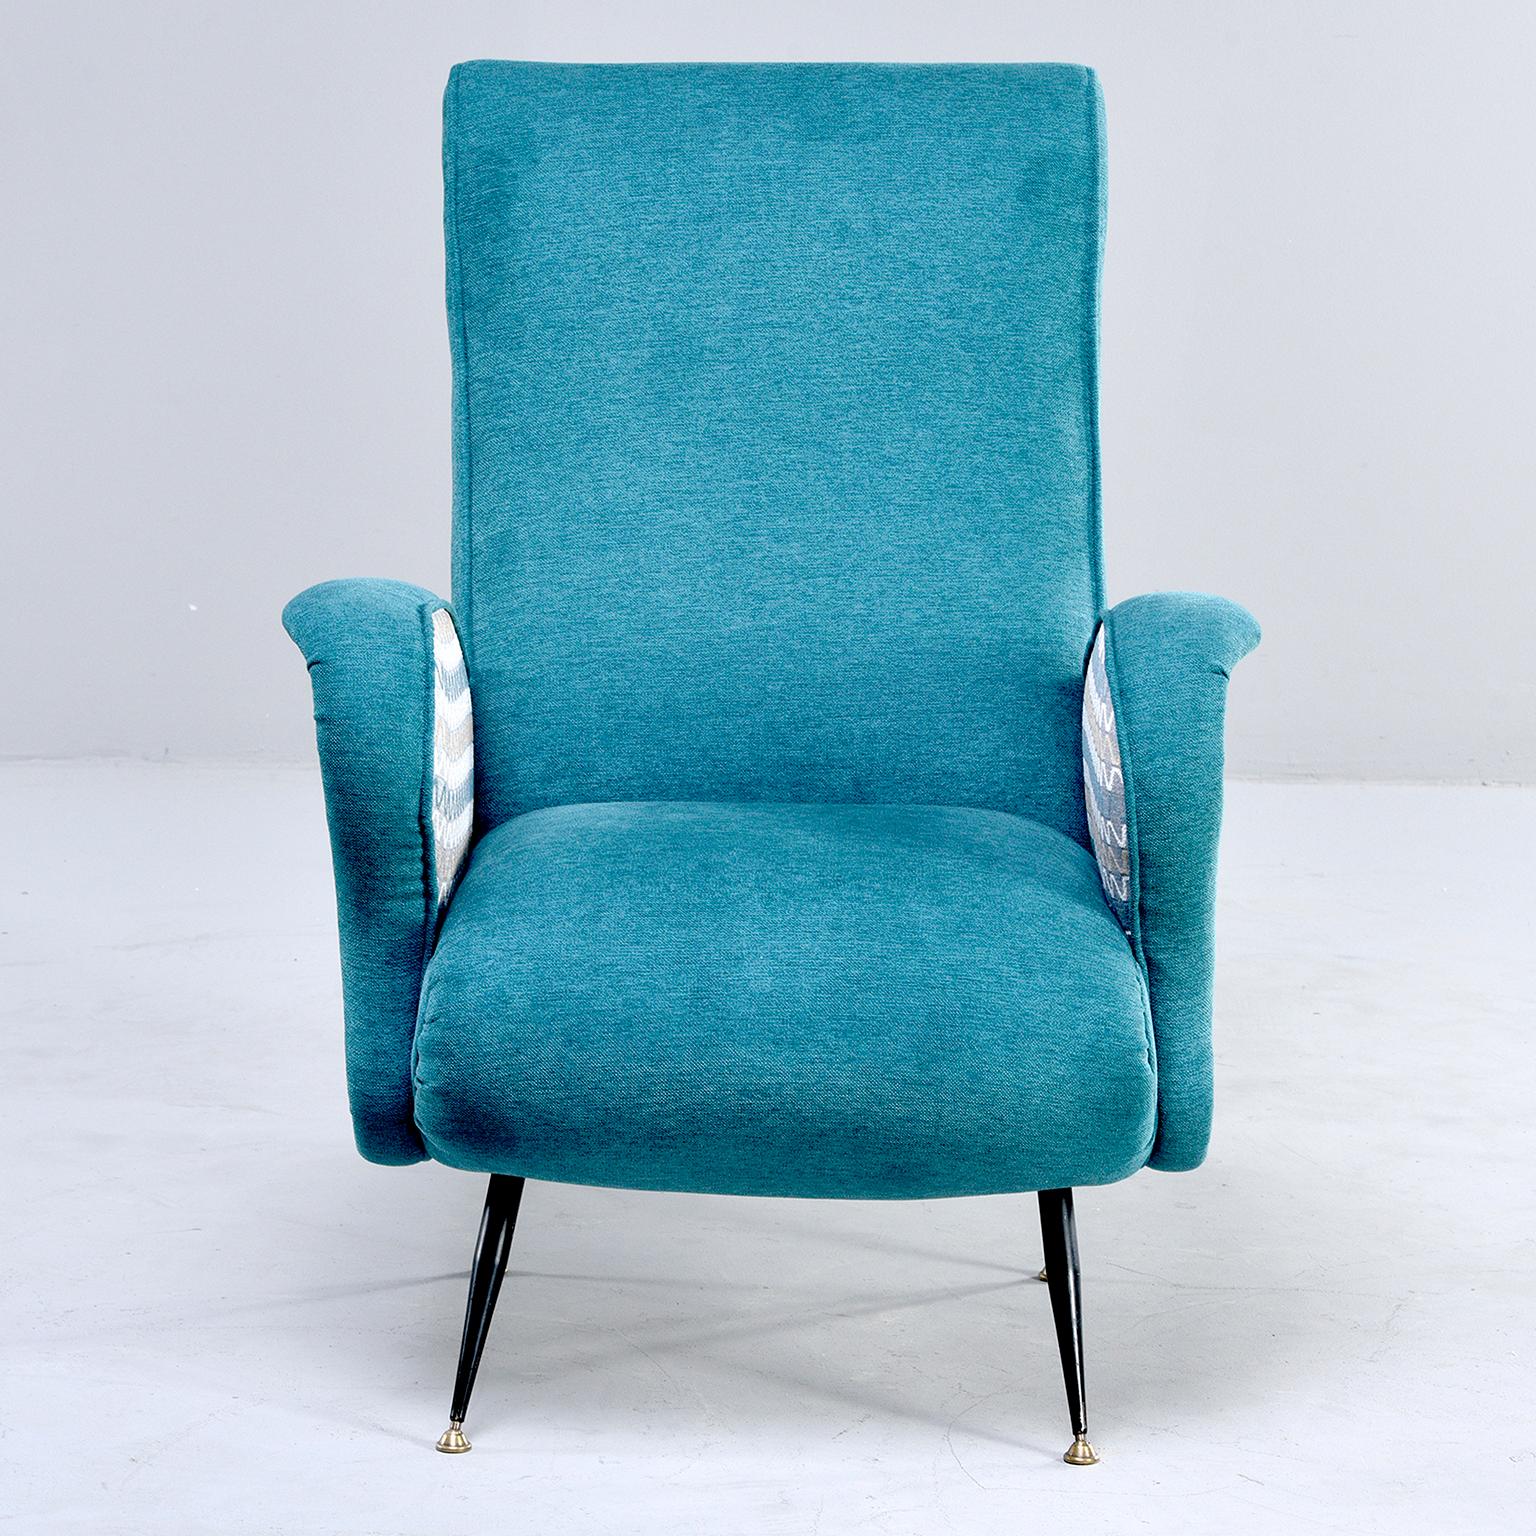 1950s Italian modern lounge chair features sleek tapered legs and unique two-tone turquoise chenille upholstery. Sculpted arms in contrasting zig-zag pattern and brass feet. Very good vintage condition with new upholstery. 
   